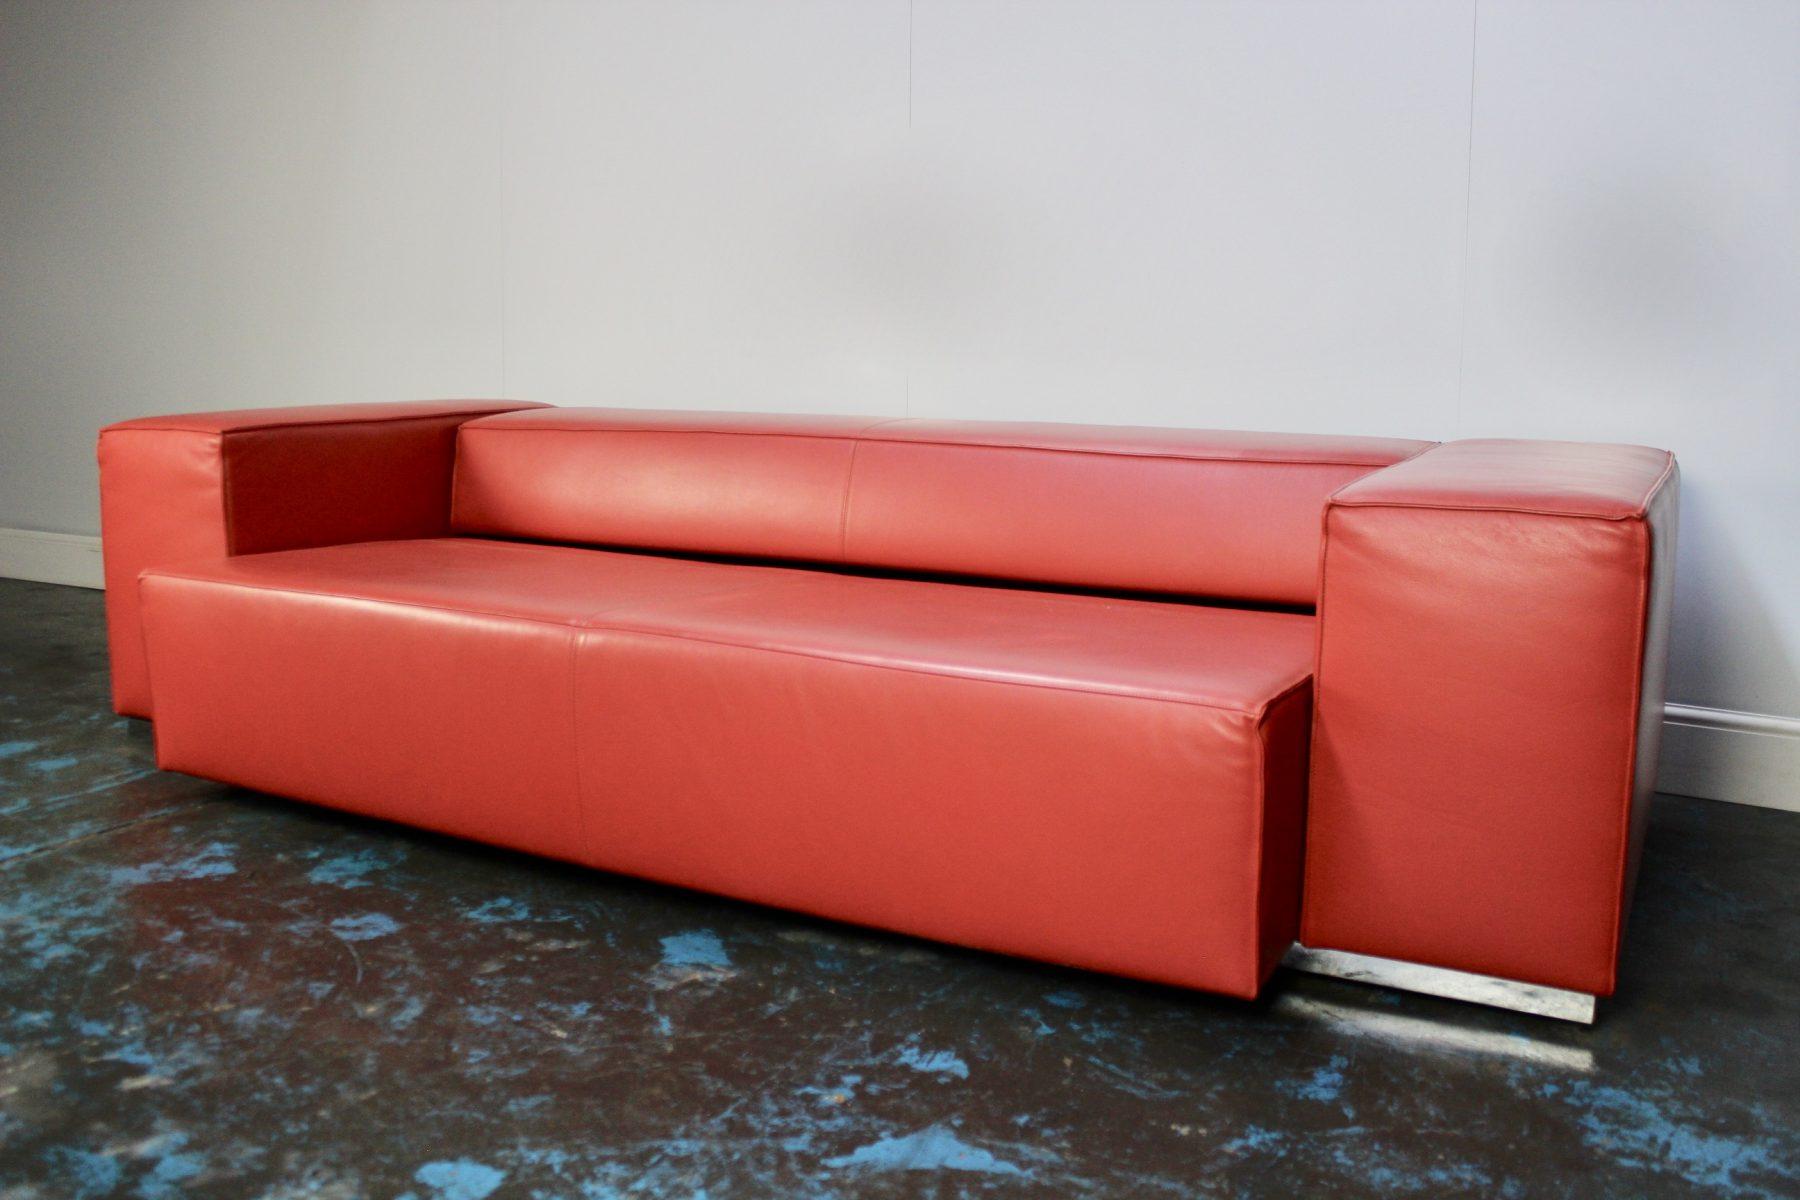 Cassina “Big Blox” 3-Seat Sofa Bed in Deep Red Leather 4